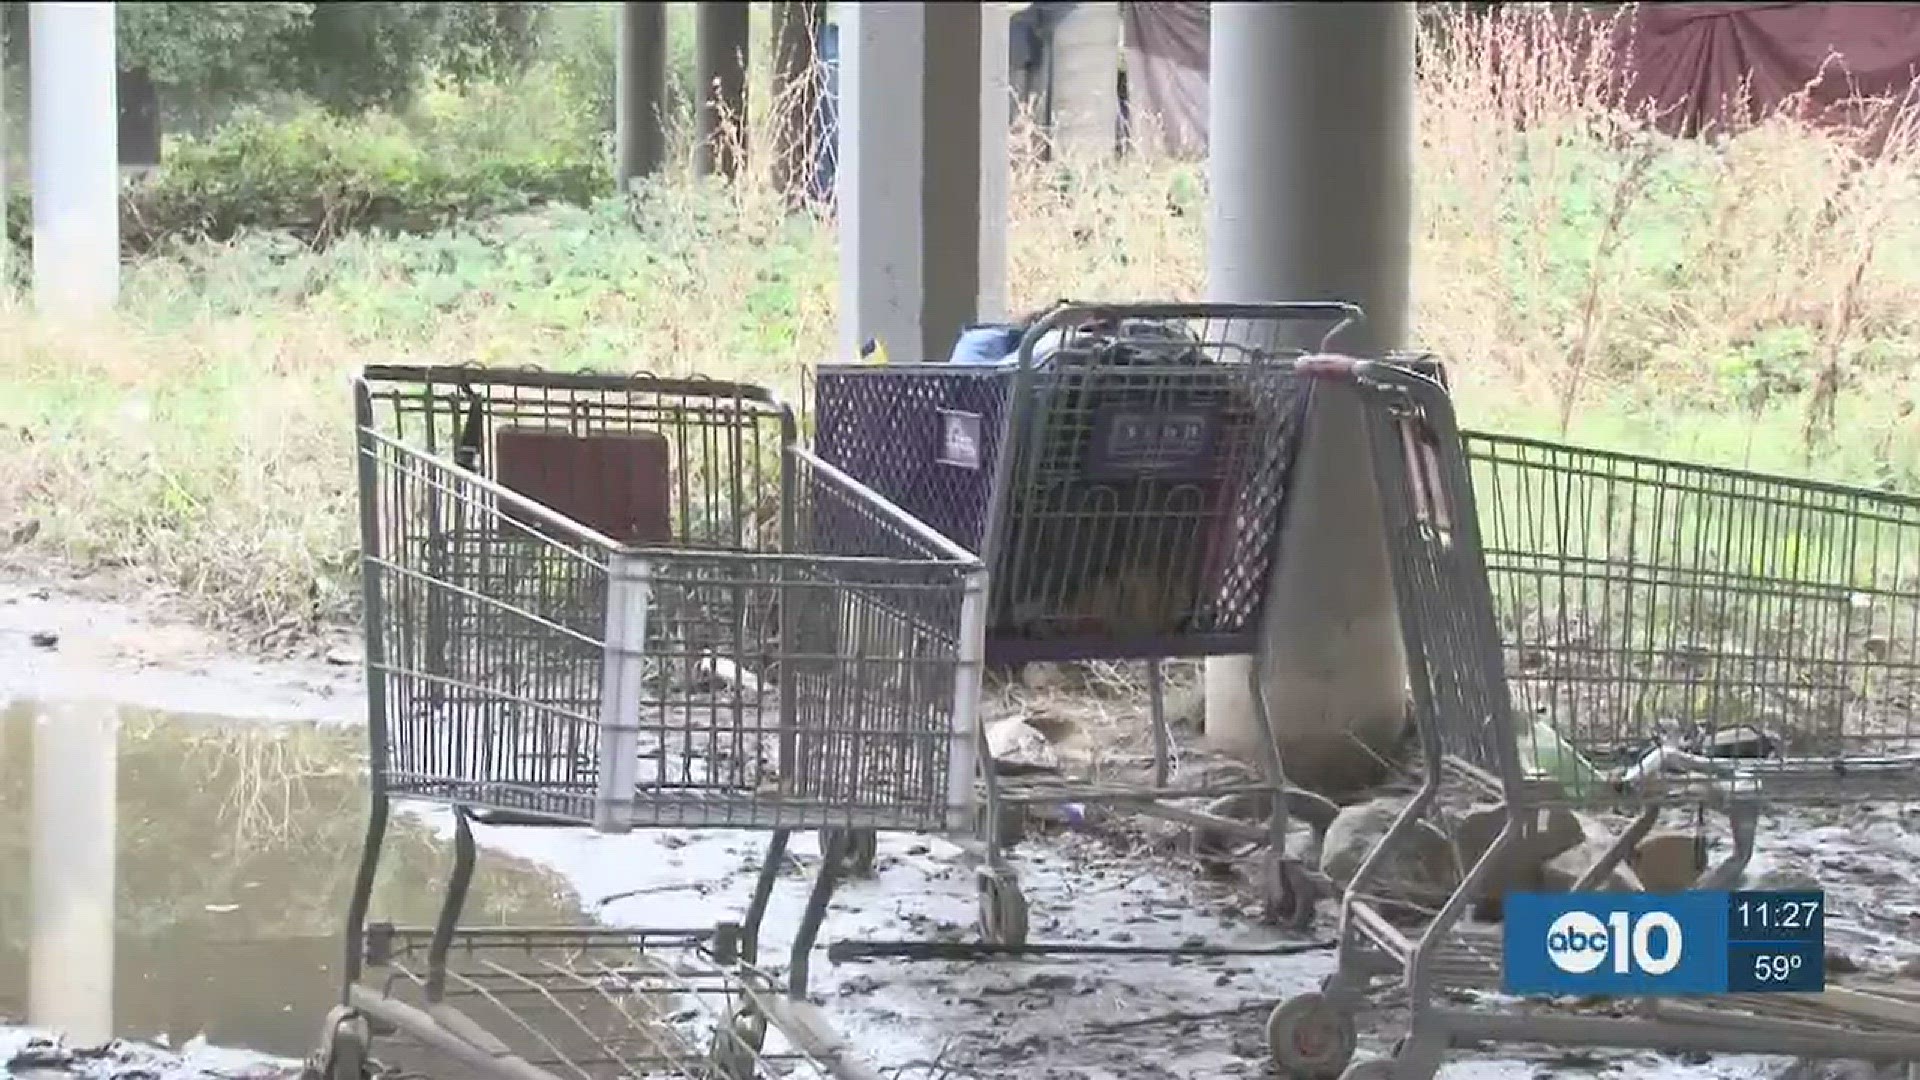 Retailers in the Lodi area have seen an increase of shopping cart theft. The problem has become bad that the city of Lodi is getting involved (Oct. 25, 2016).